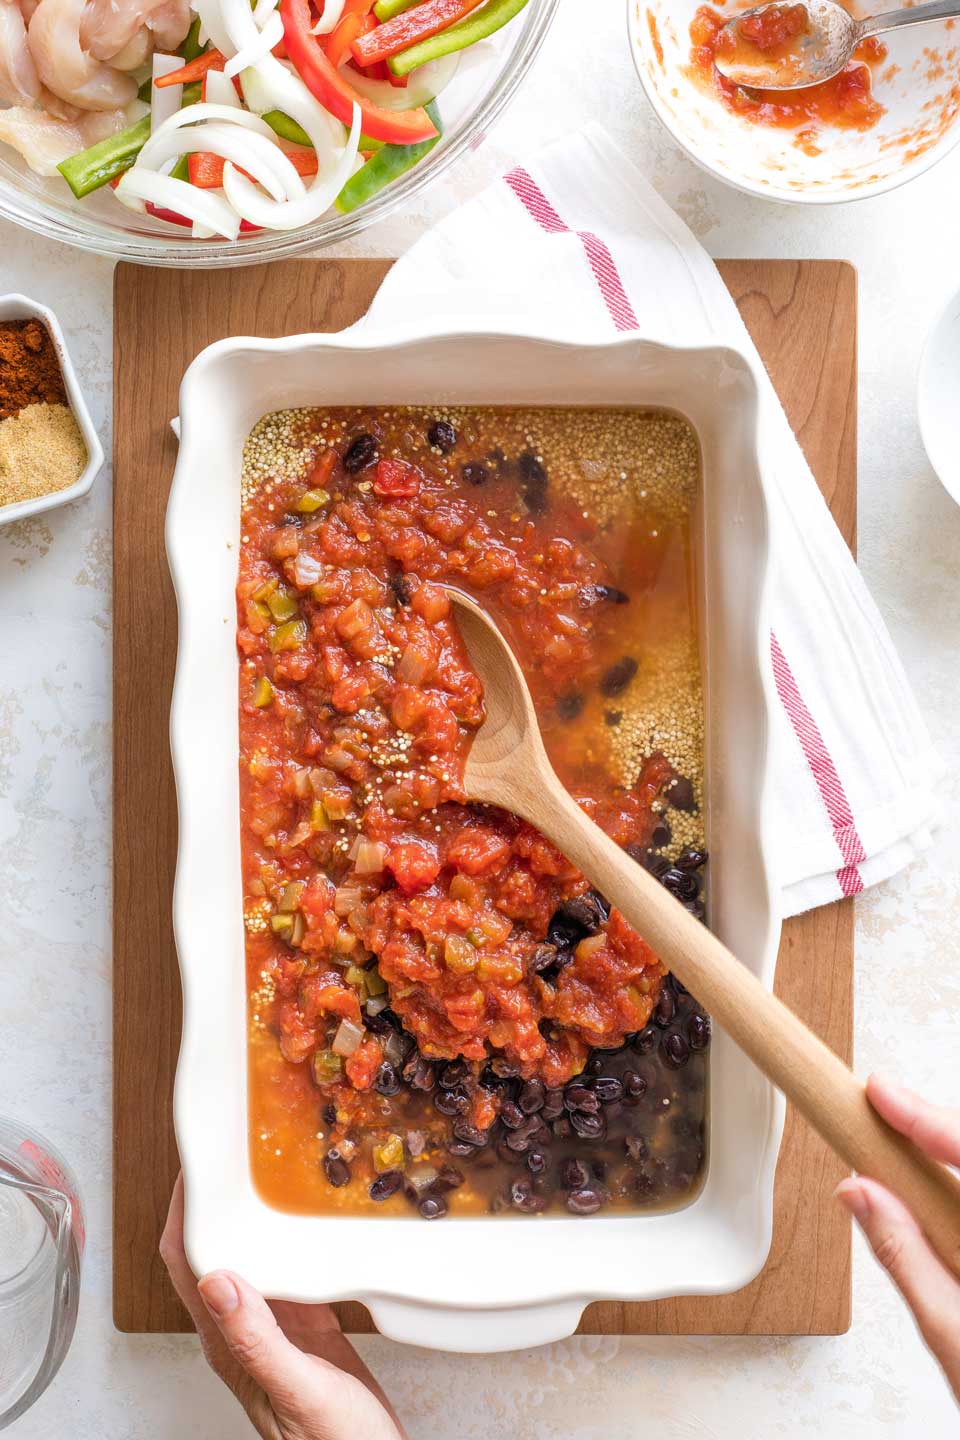 Hands holding casserole dish and wooden spoon, mixing Mexican black beans, salsa and quinoa base.